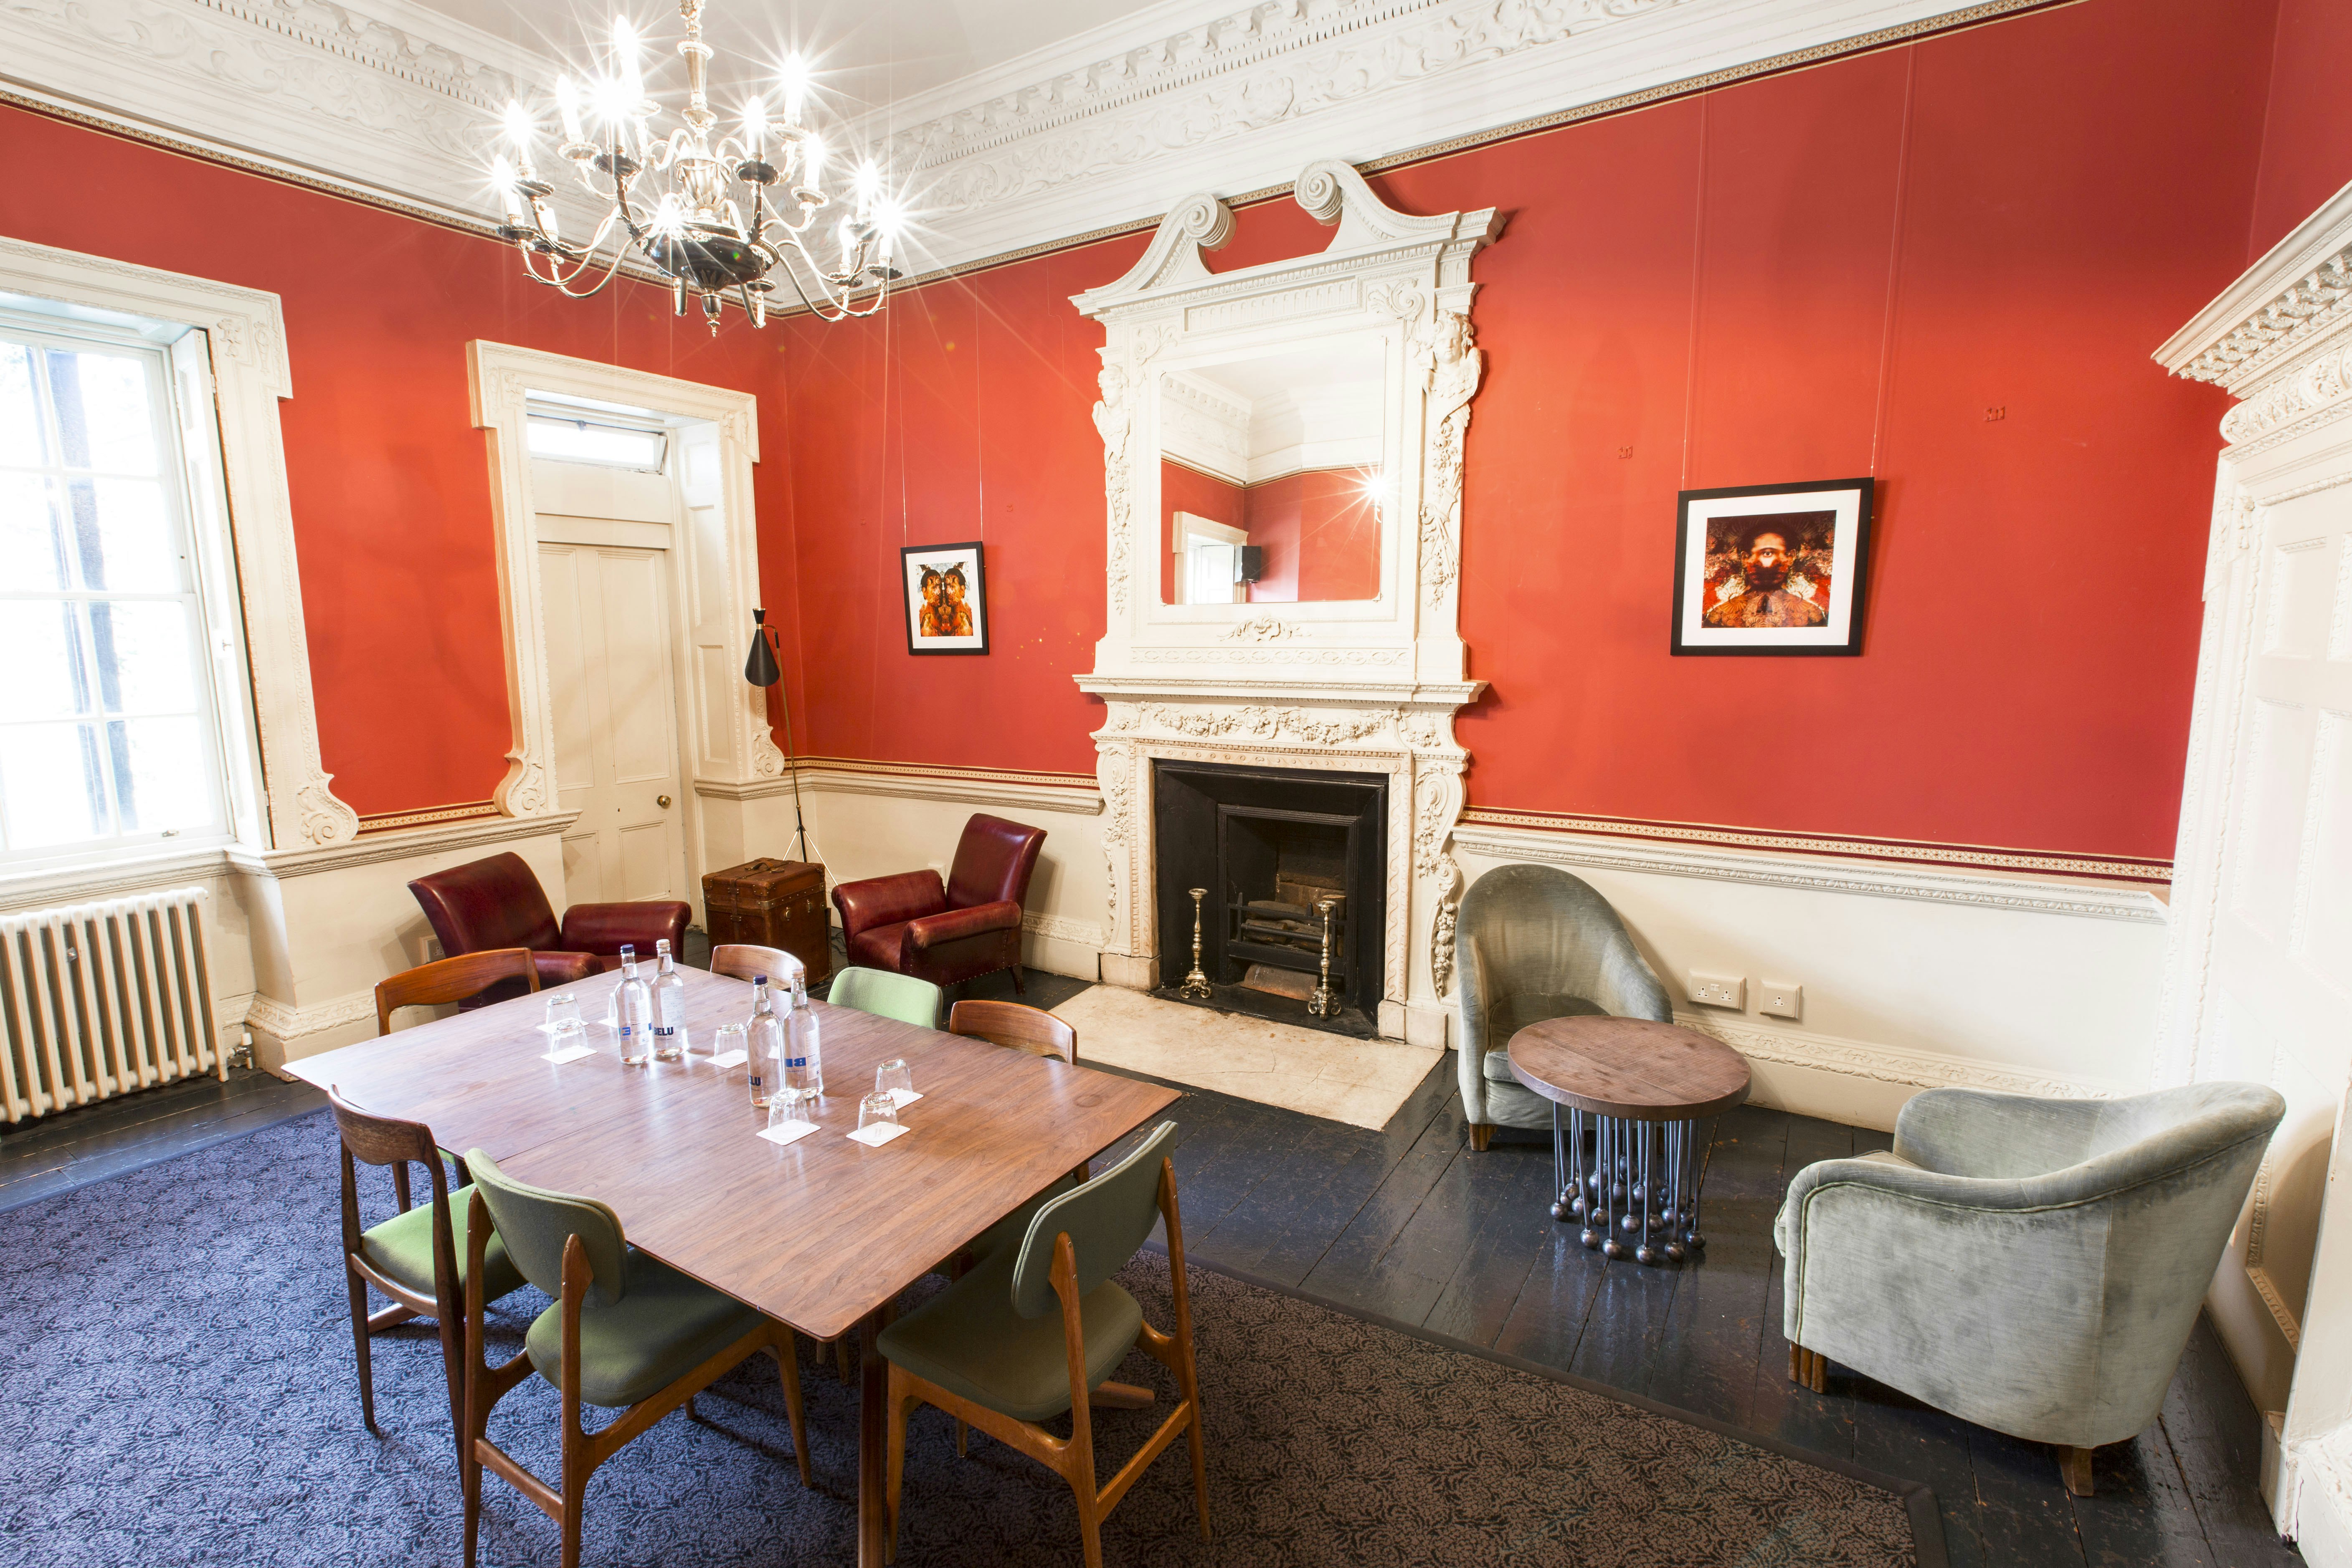 The House of St Barnabas - First Floor image 5